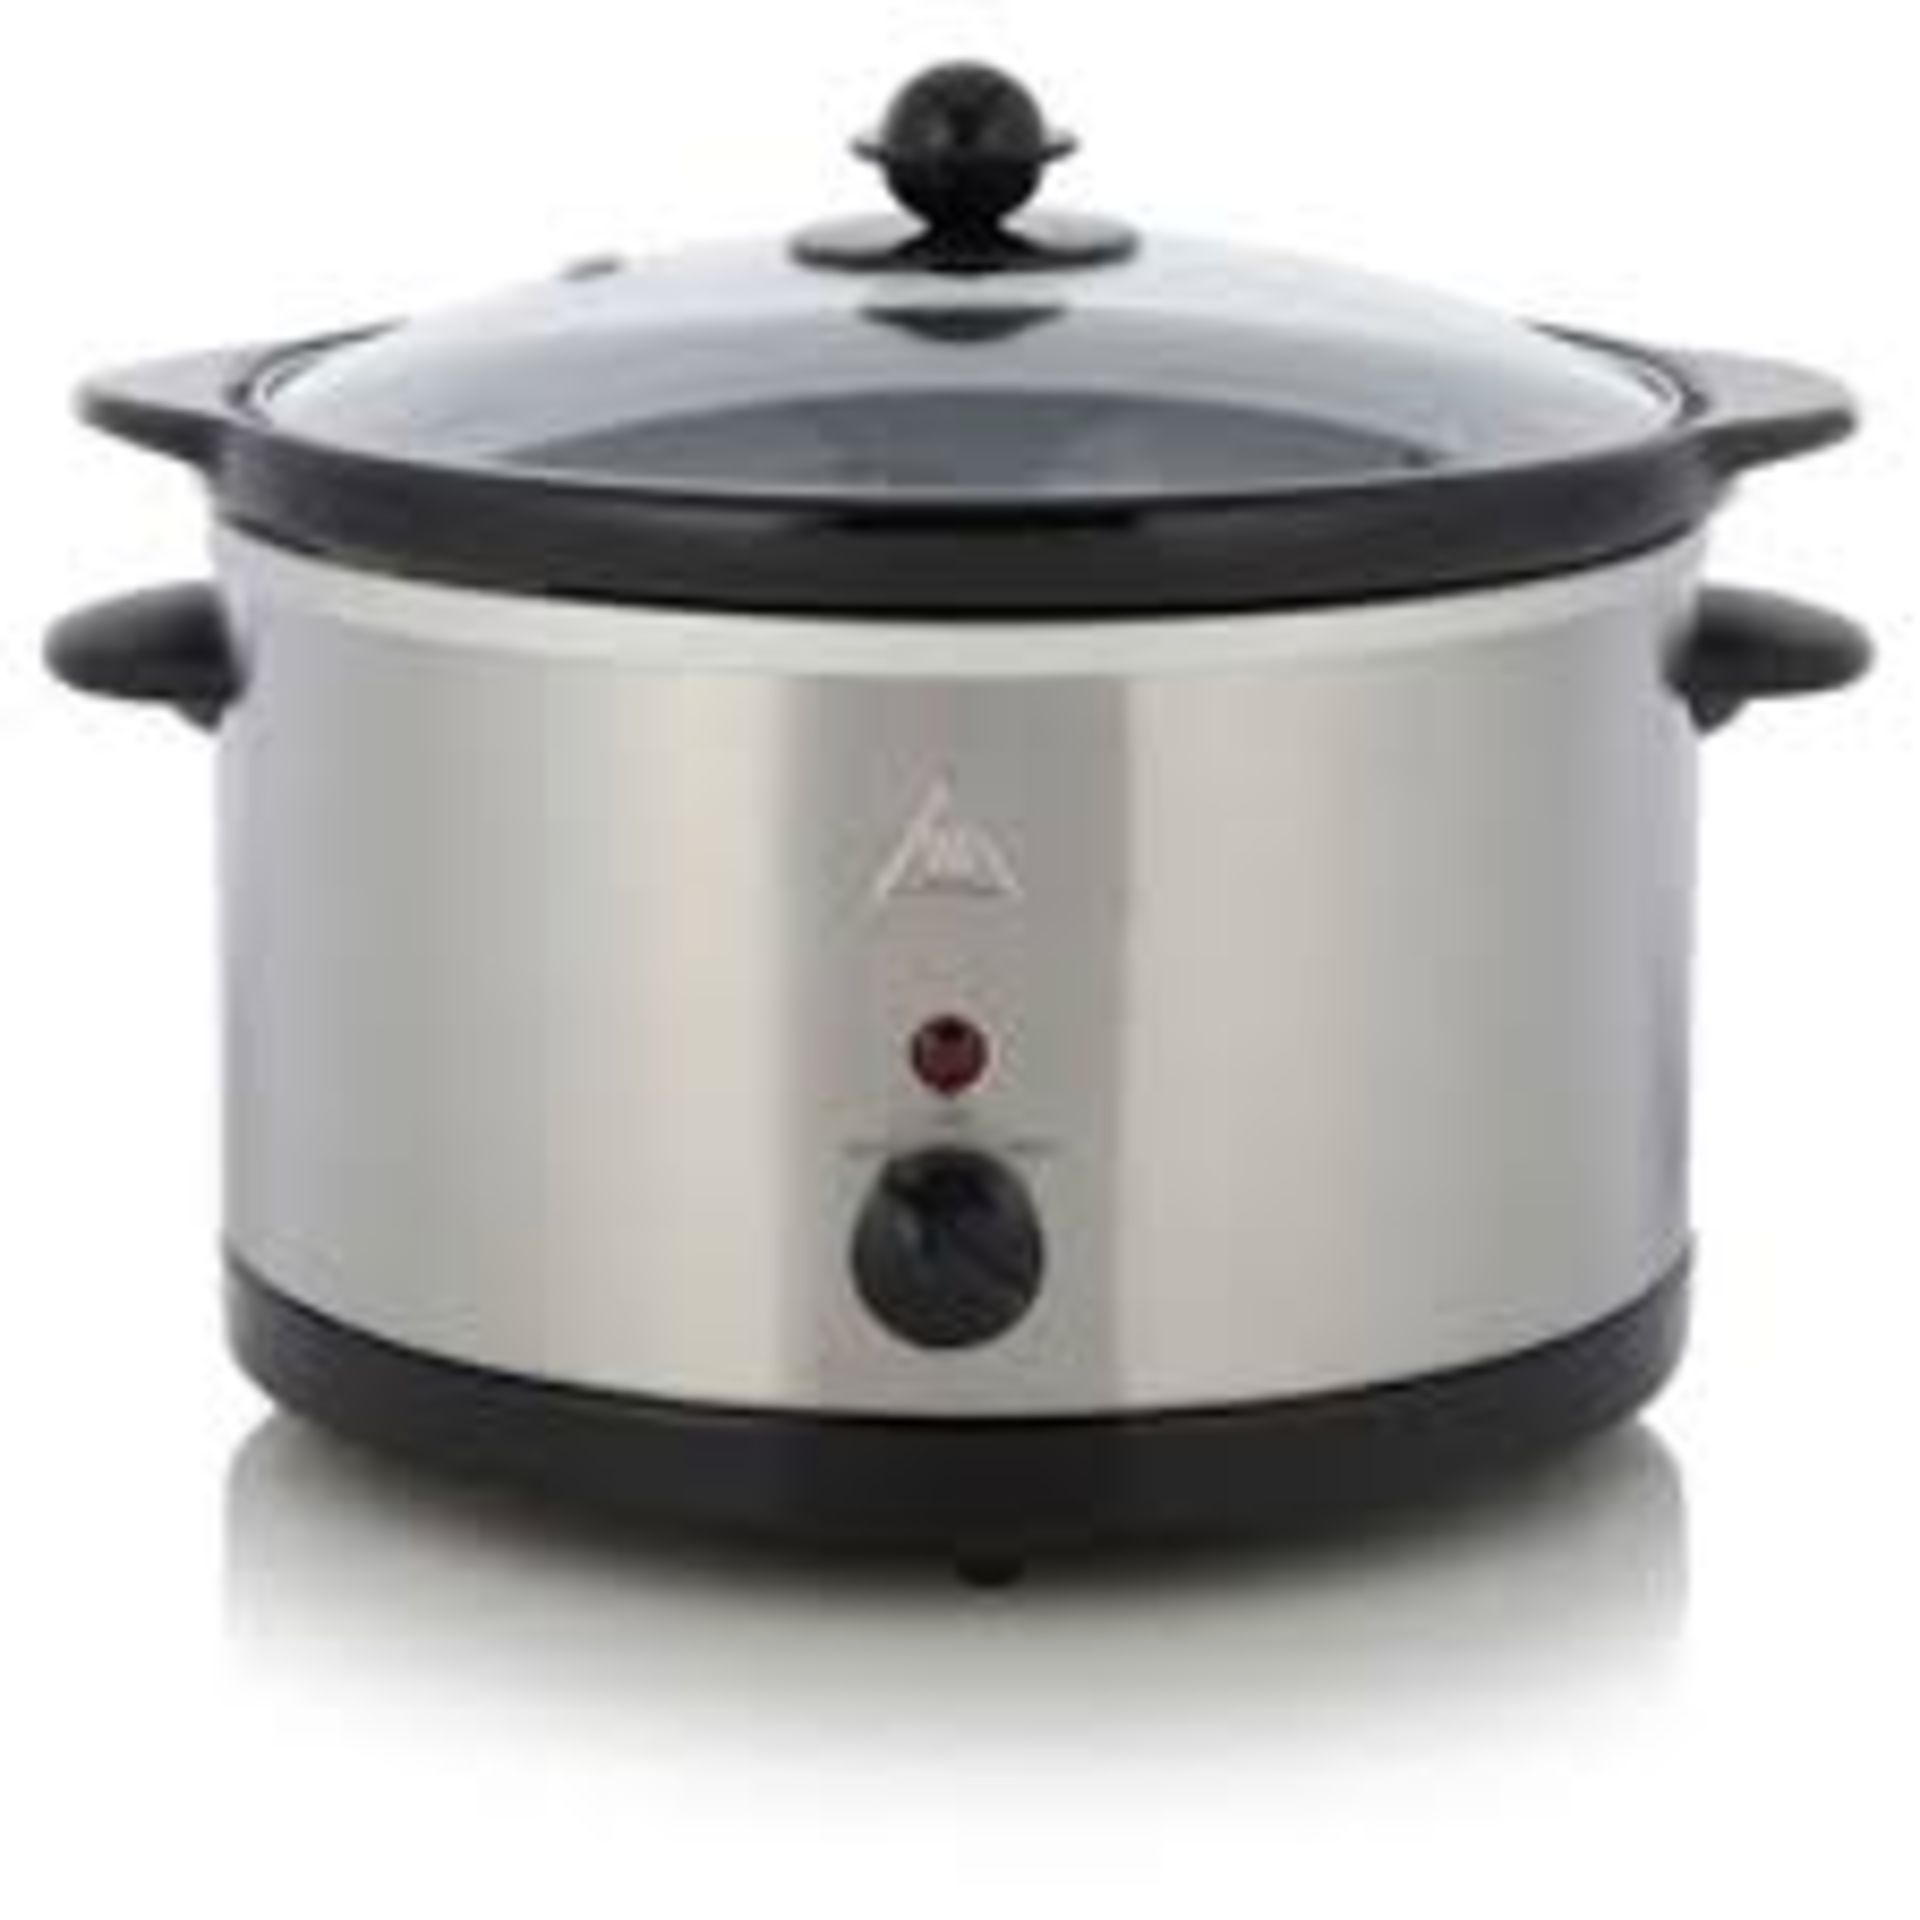 George Home 3L Slow Cooker - Stainless Steel. - PW.